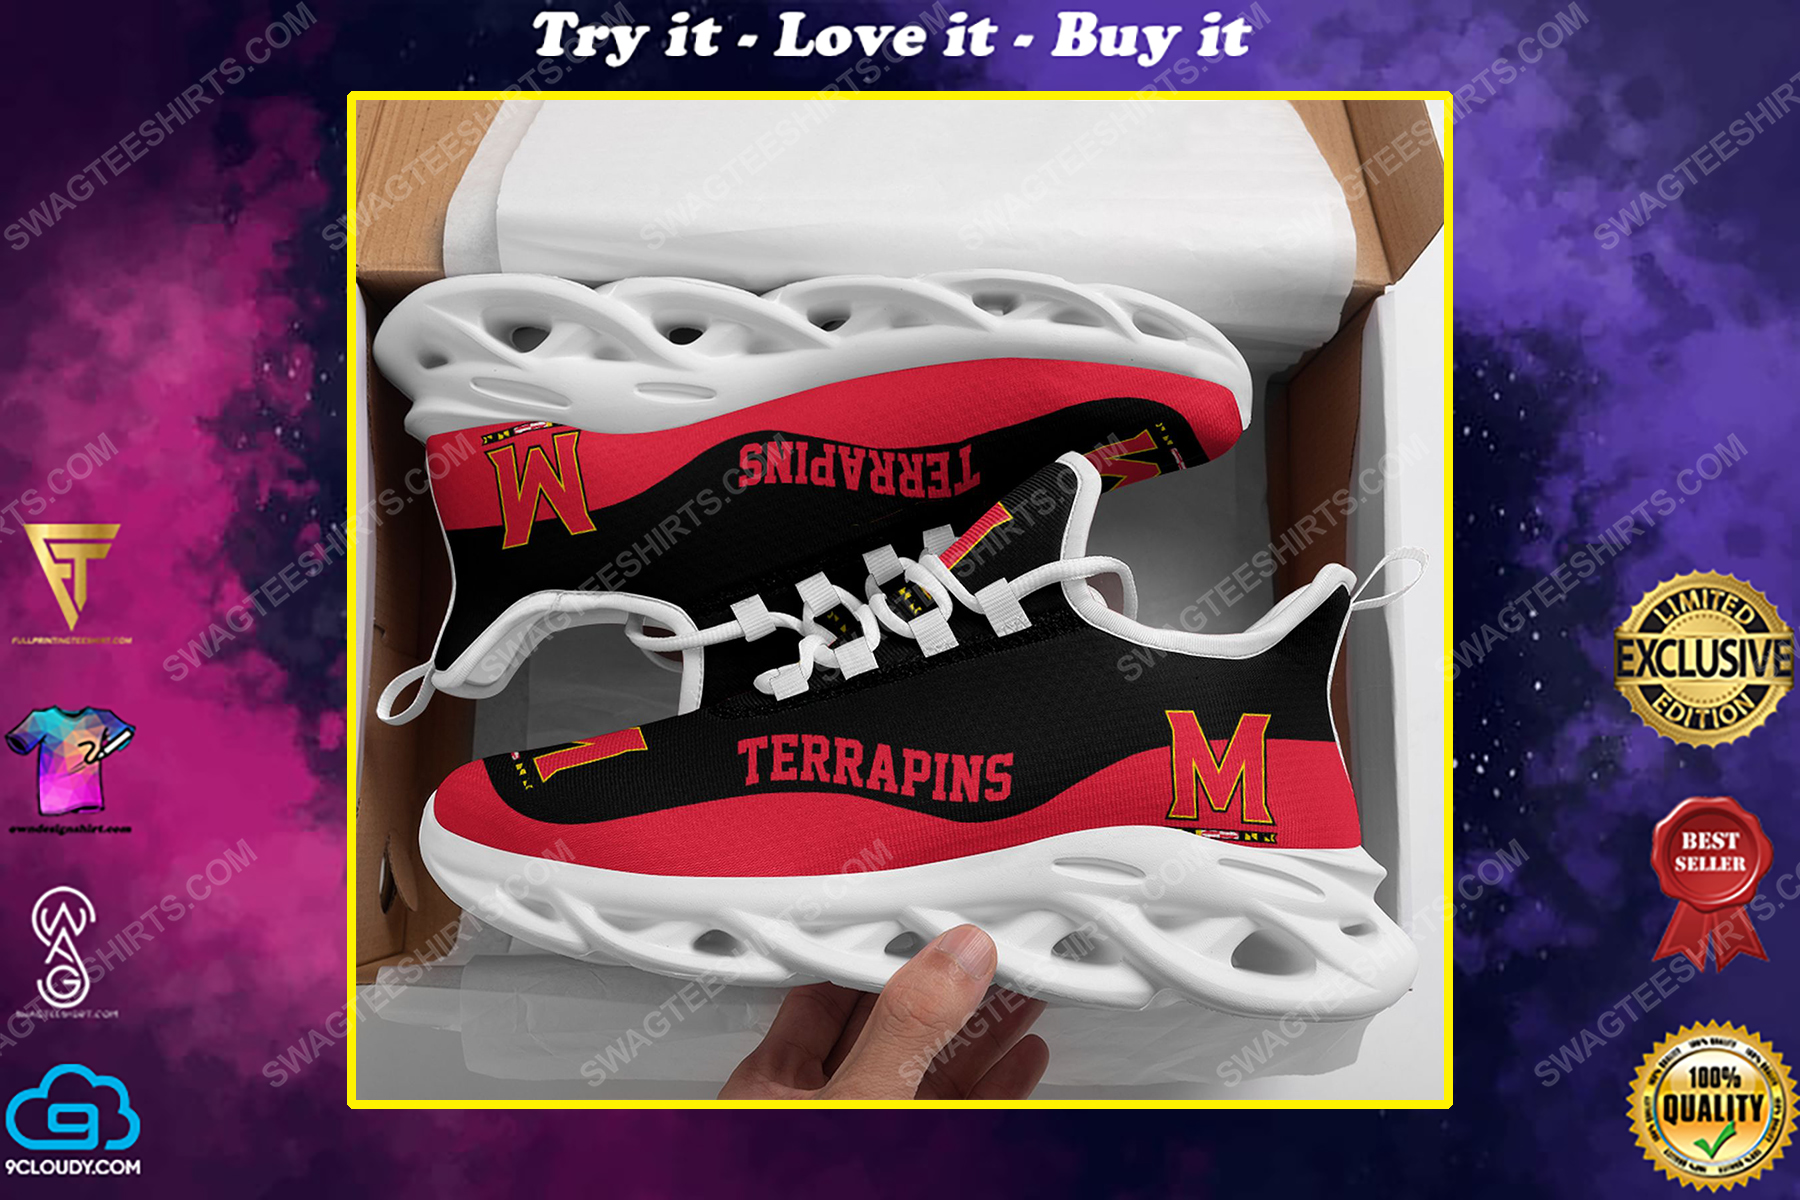 The maryland terrapins football team max soul shoes